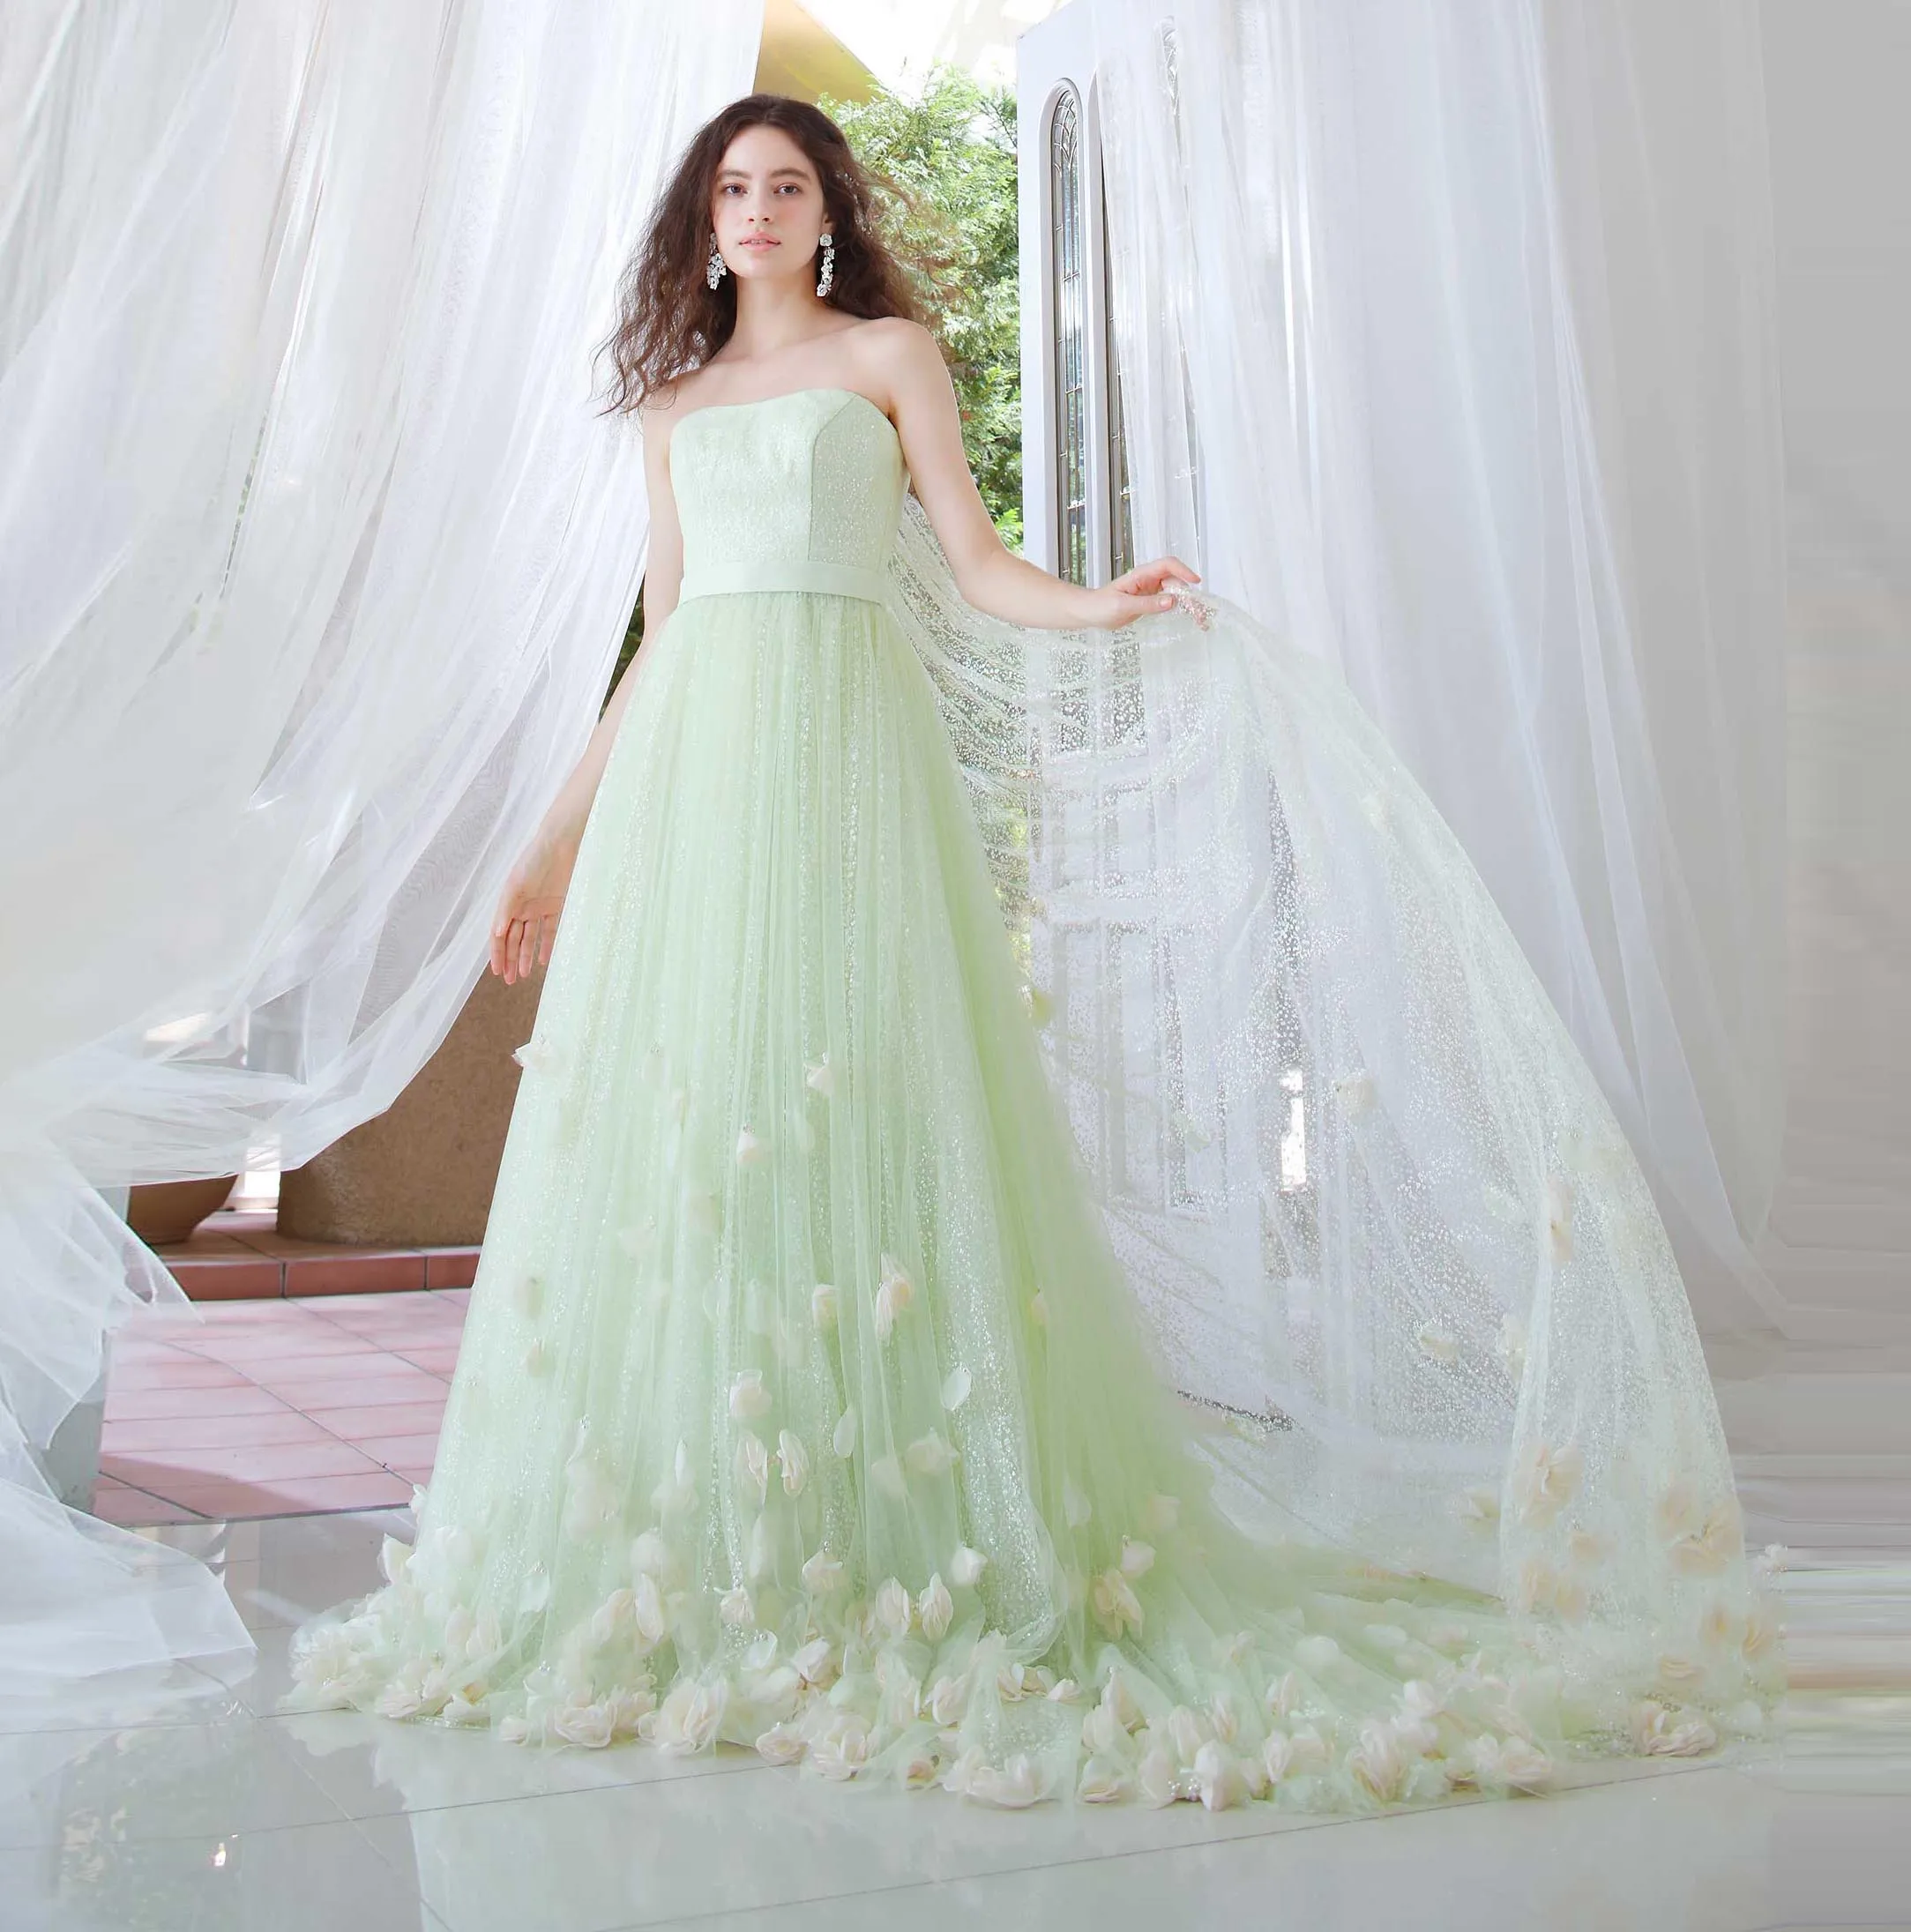 

Sage Green Sparkly Tulle A-Line Prom Dress Flowered Evening Dress With Trian Ever Pretty Wedding Dresses Strapless Floral Dress